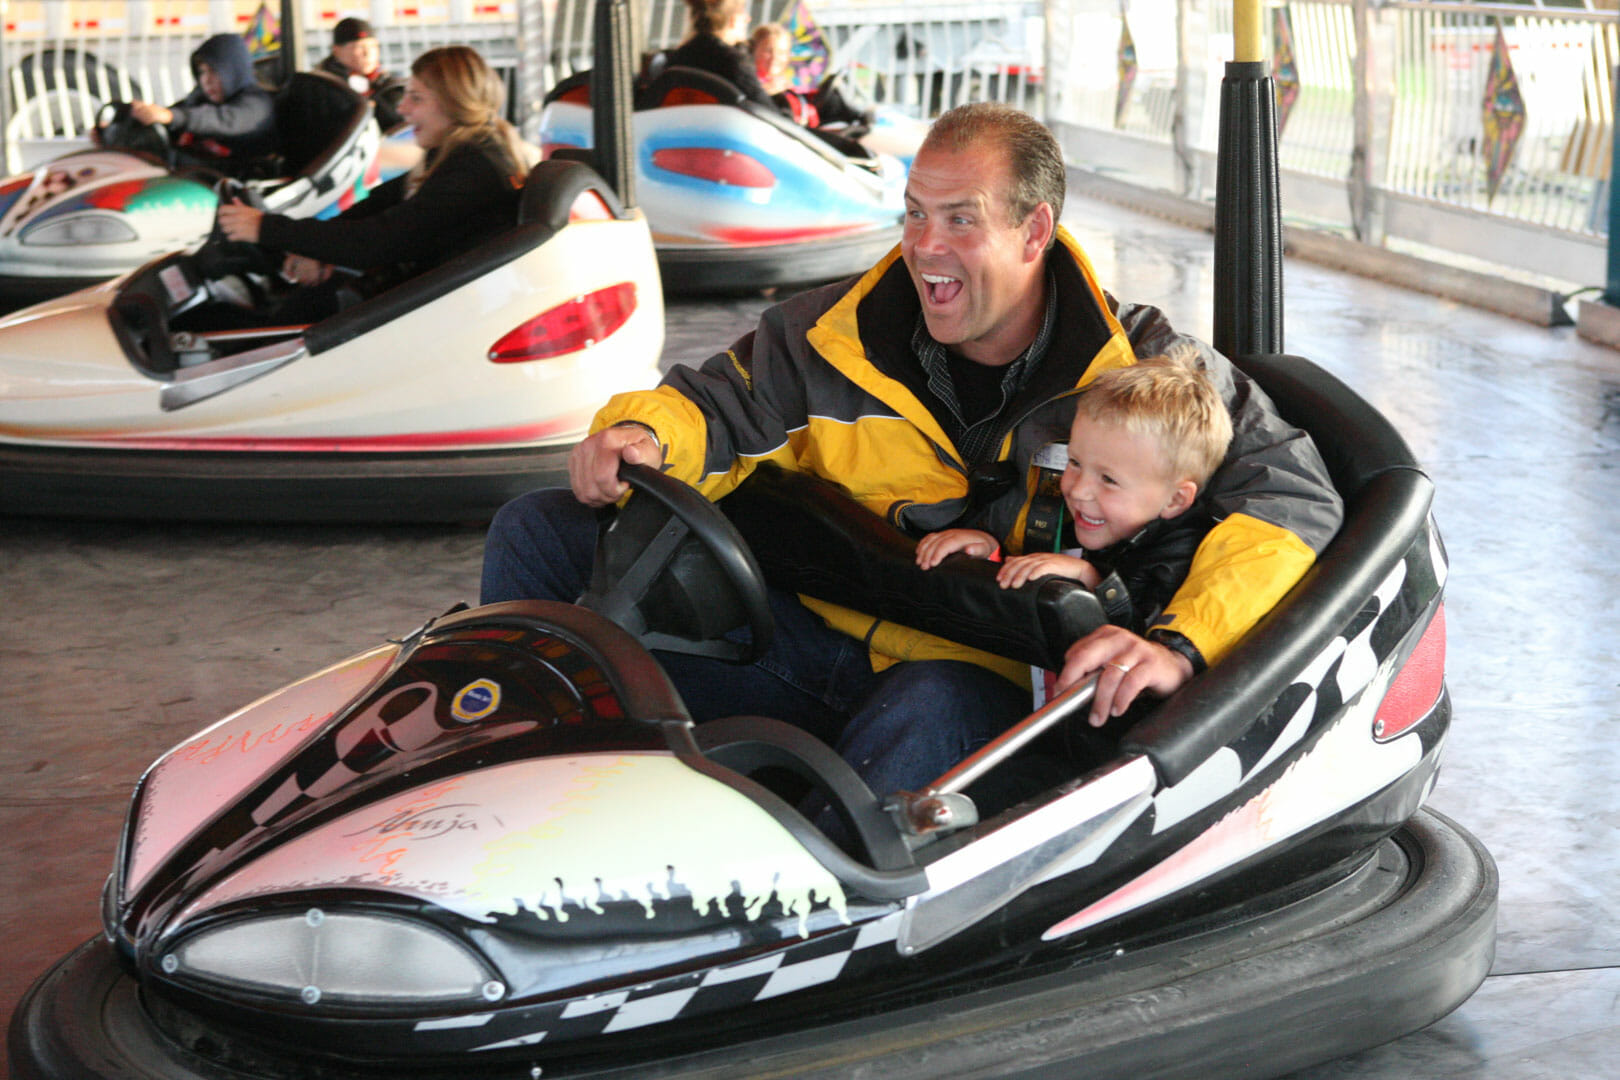 Markham Fair Friday - Midway Father and Son bumper car ride